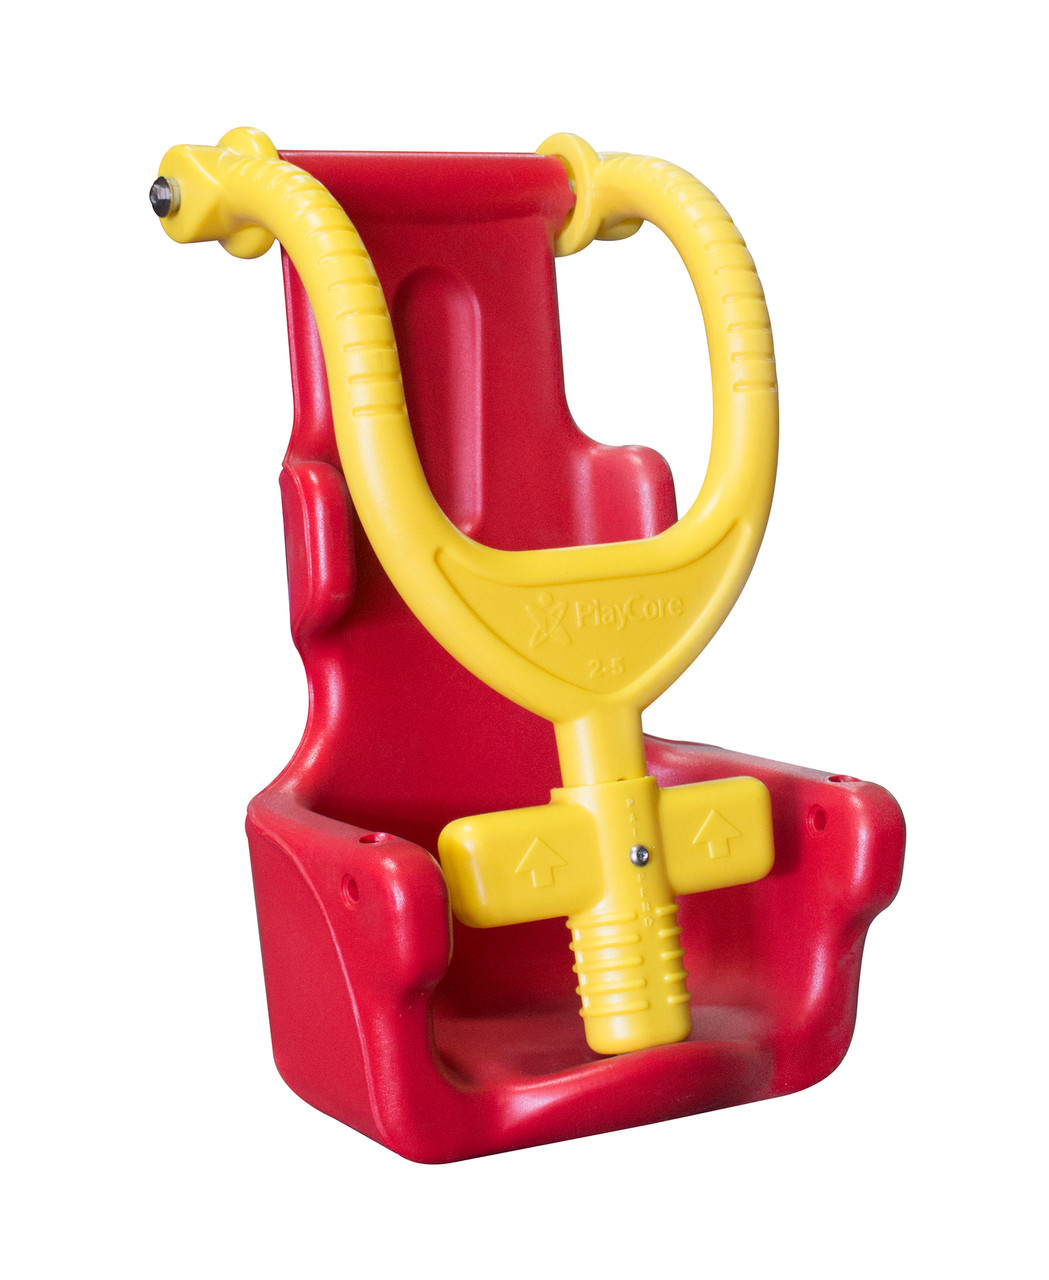 ADA Handicap Swing Seat for Children ages 5-12 years of age